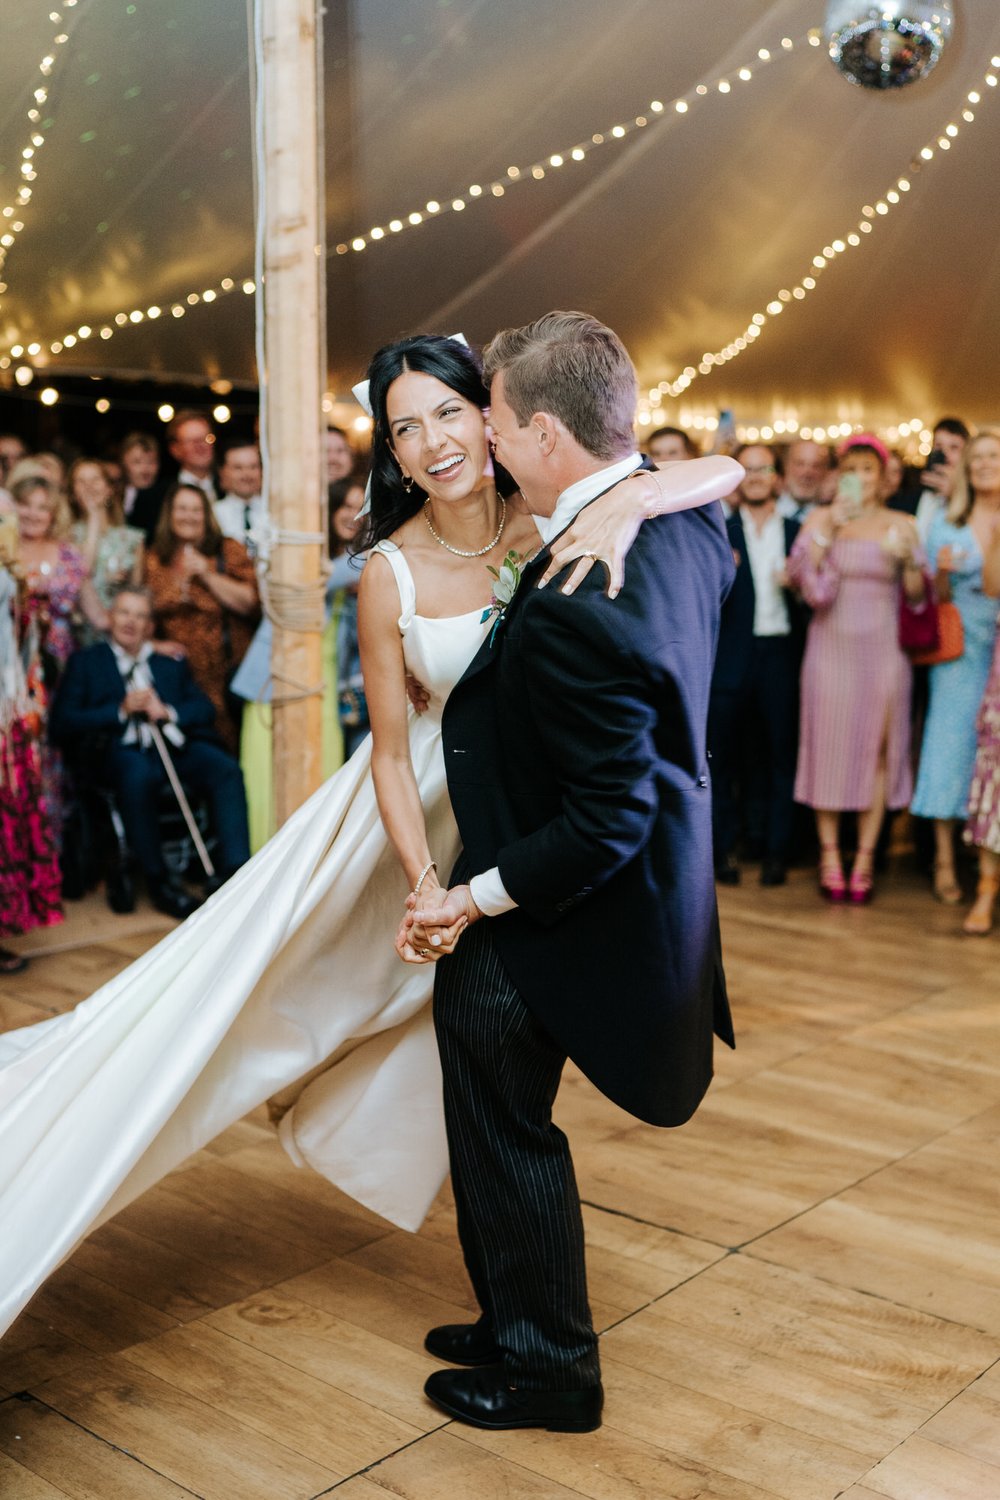 Groom lifts up the bride and swirls her along the dancefloor as she looks on excitedly